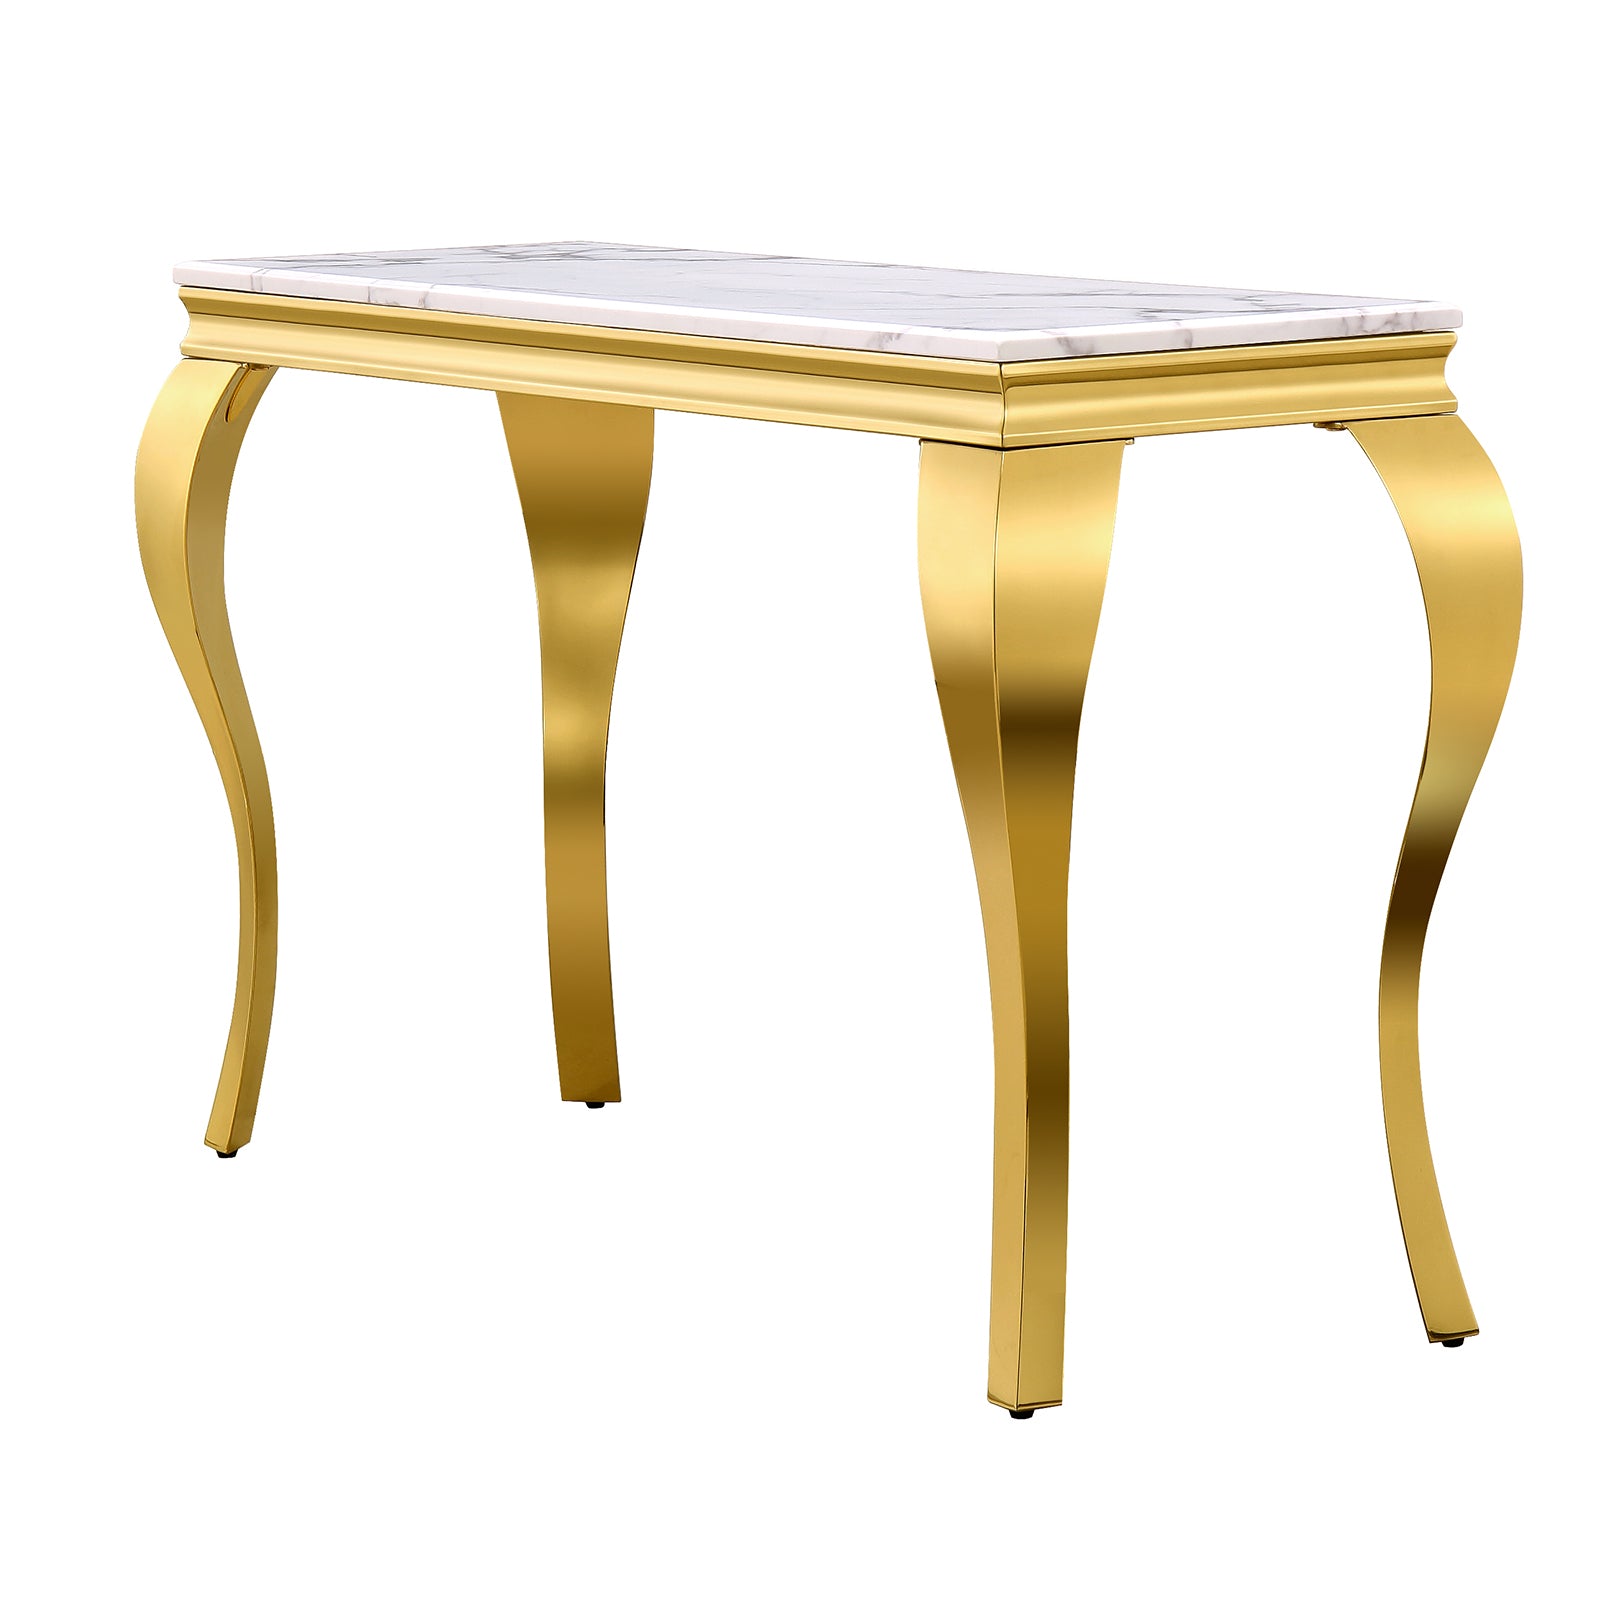 Elevate Your Space with the AUZ White and Gold Entryway Table